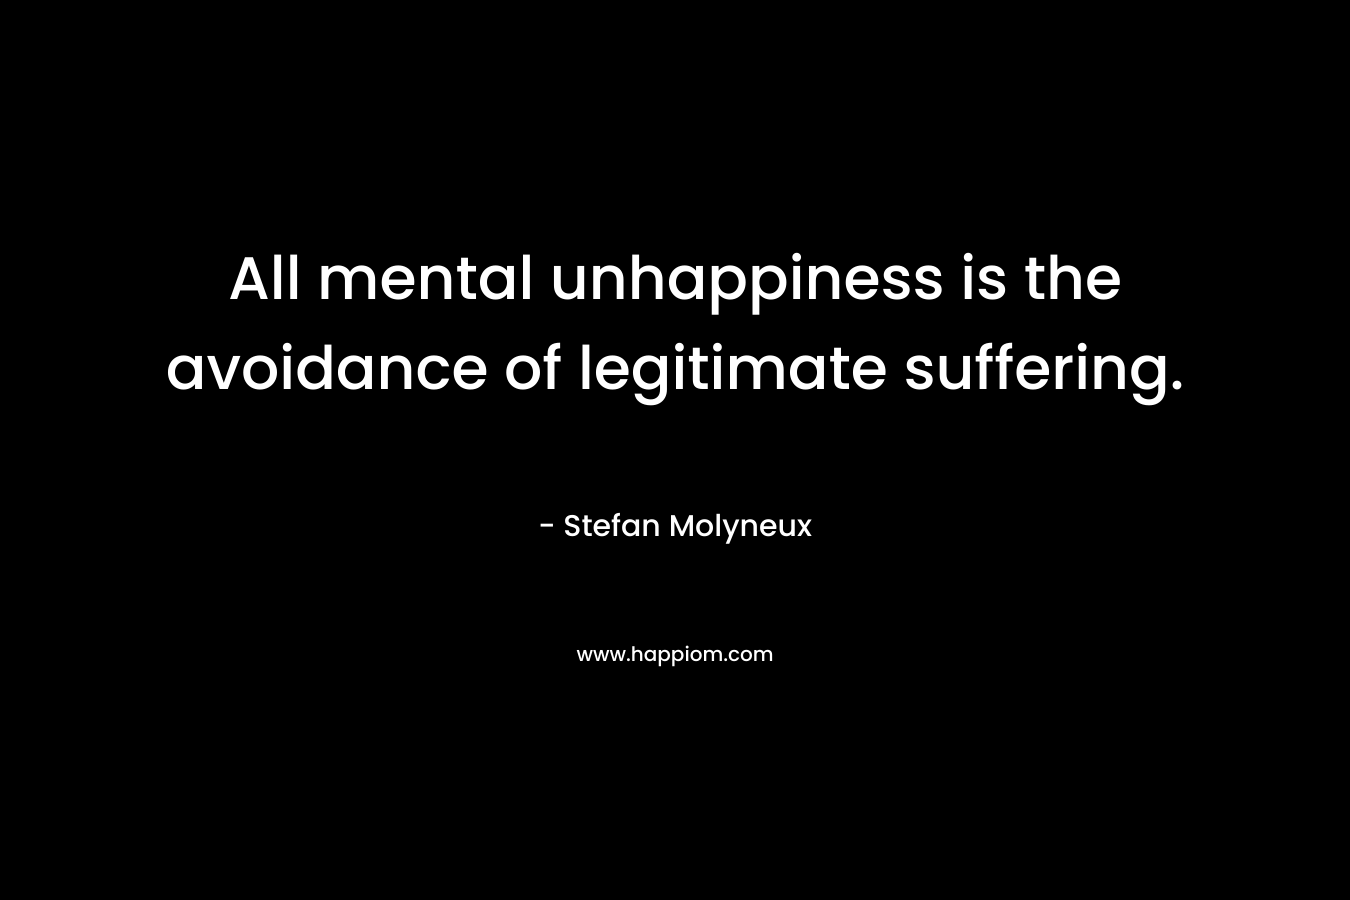 All mental unhappiness is the avoidance of legitimate suffering. – Stefan Molyneux